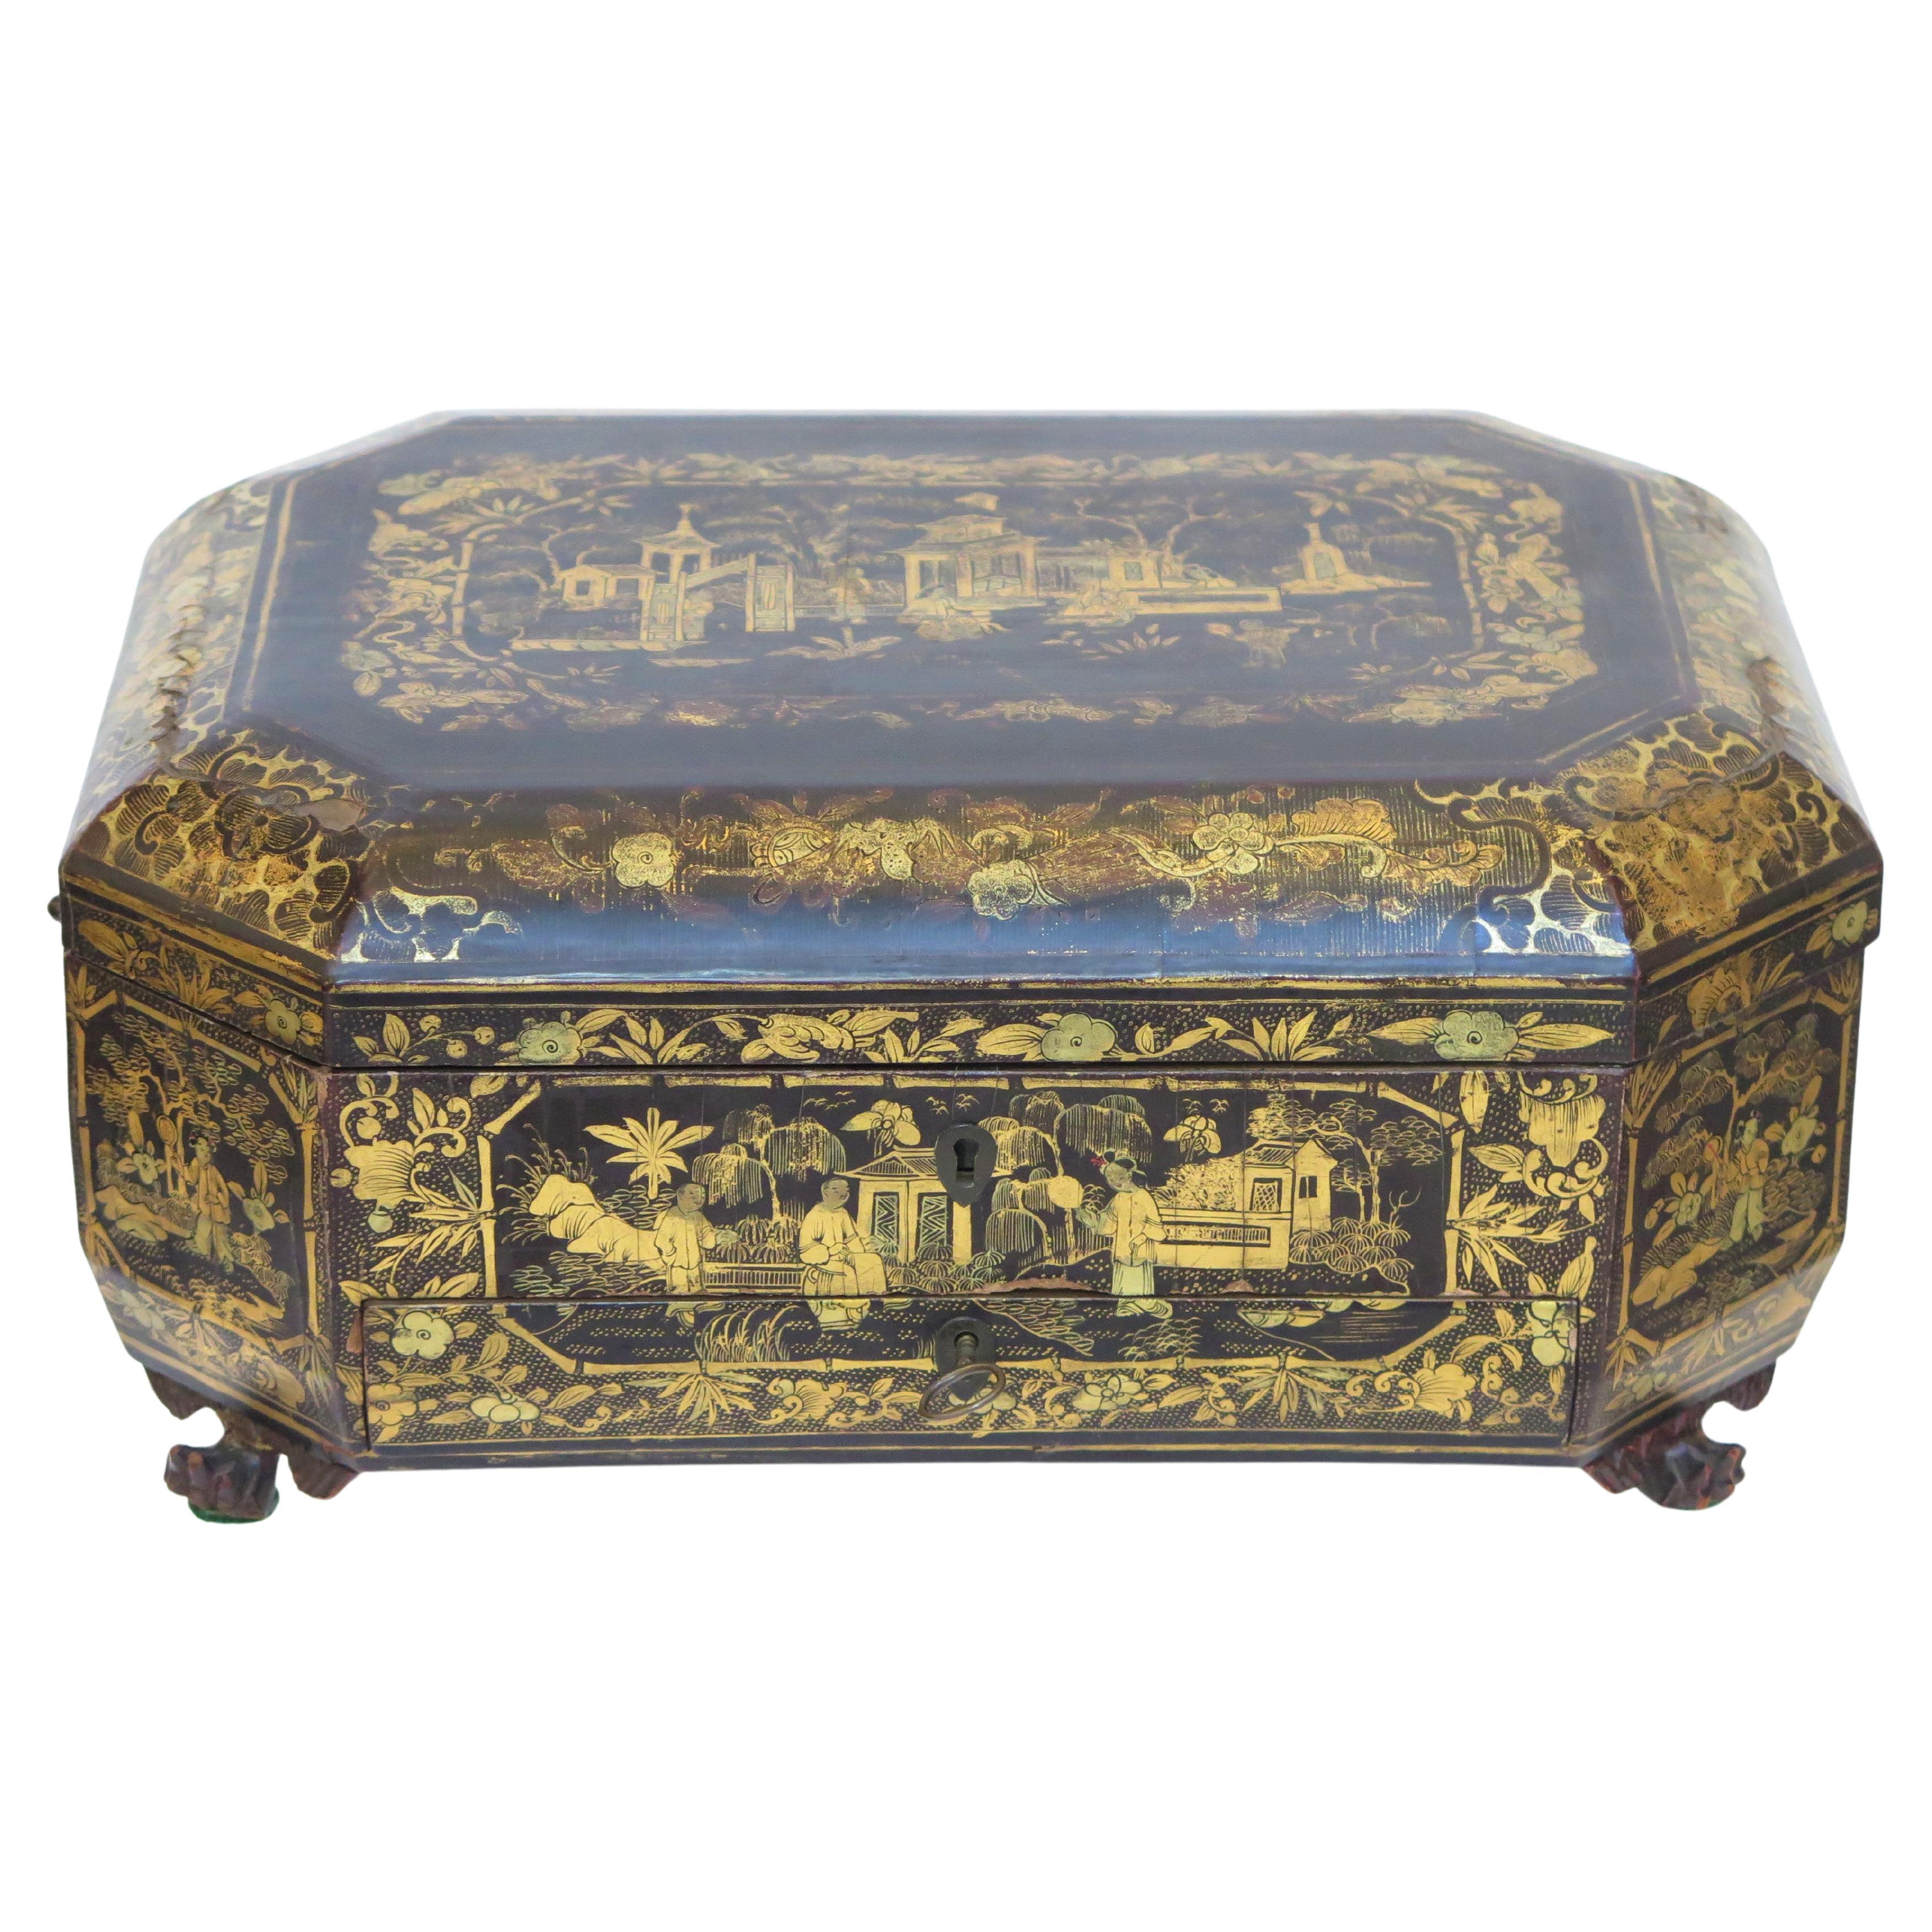 Ealy 19th Century Chinese Export Lacquer Sewing Box For Sale